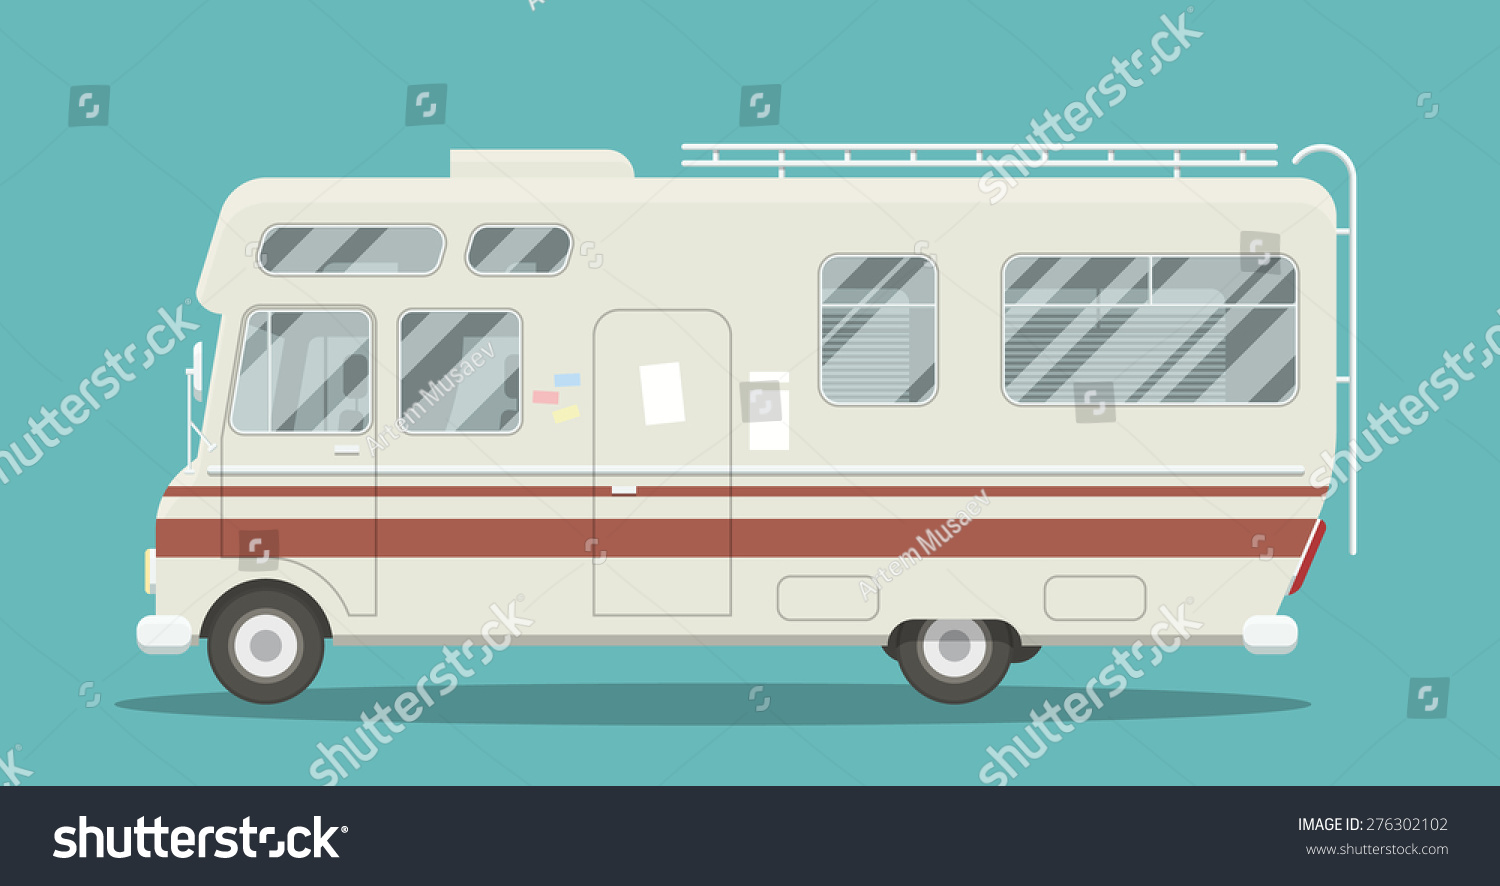 SVG of Cool illustration of a brand less camper side view. EPS10 vector image of an old motor home. svg